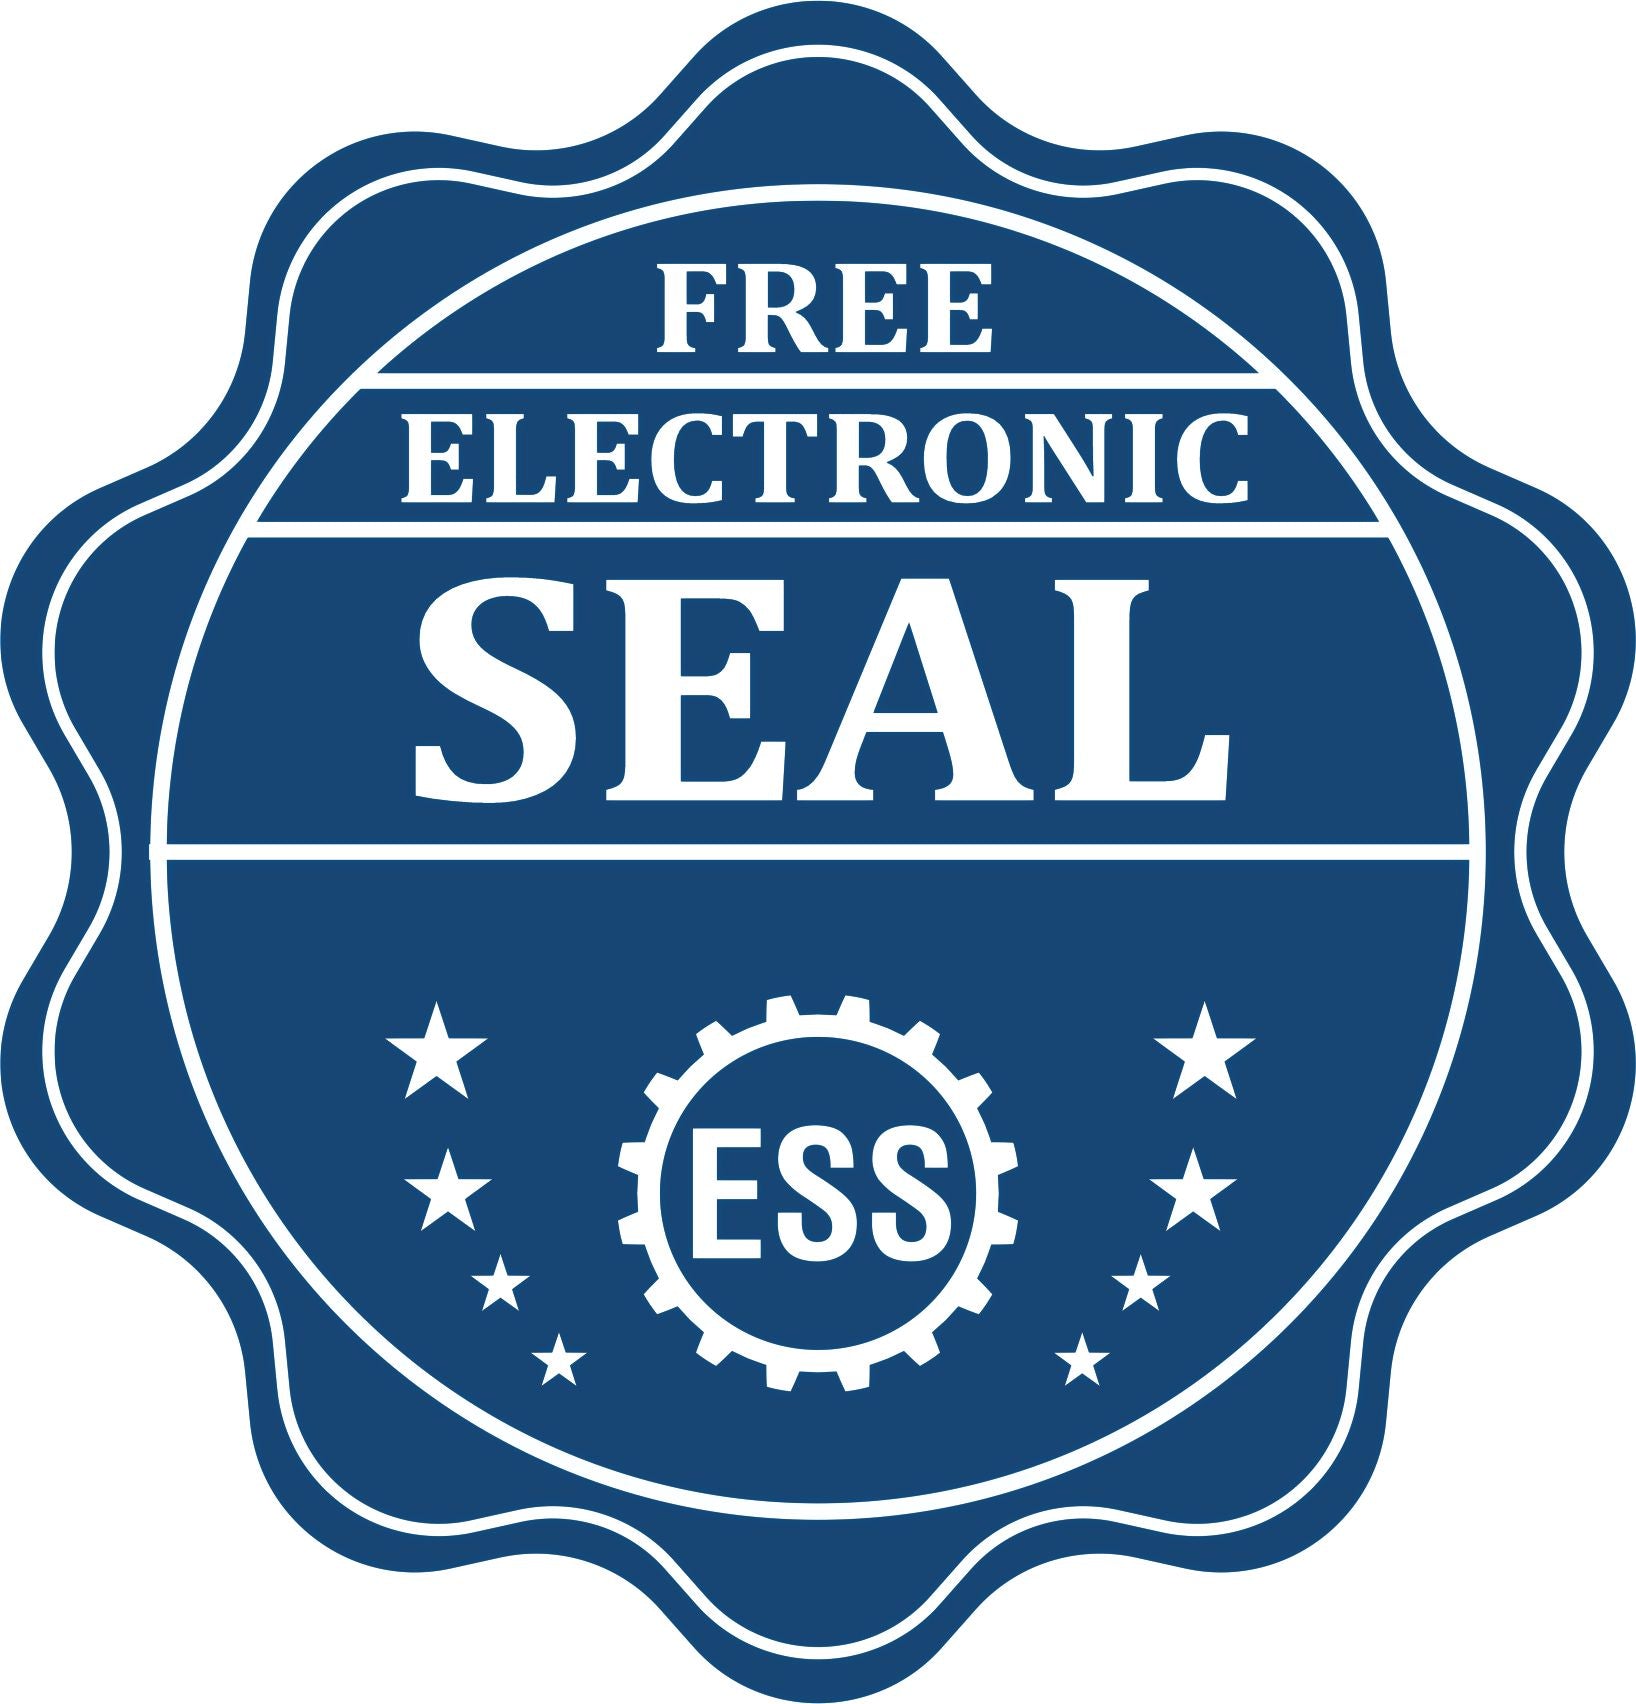 A badge showing a free electronic seal for the Super Slim Florida Notary Public Stamp with stars and the ESS gear on the emblem.